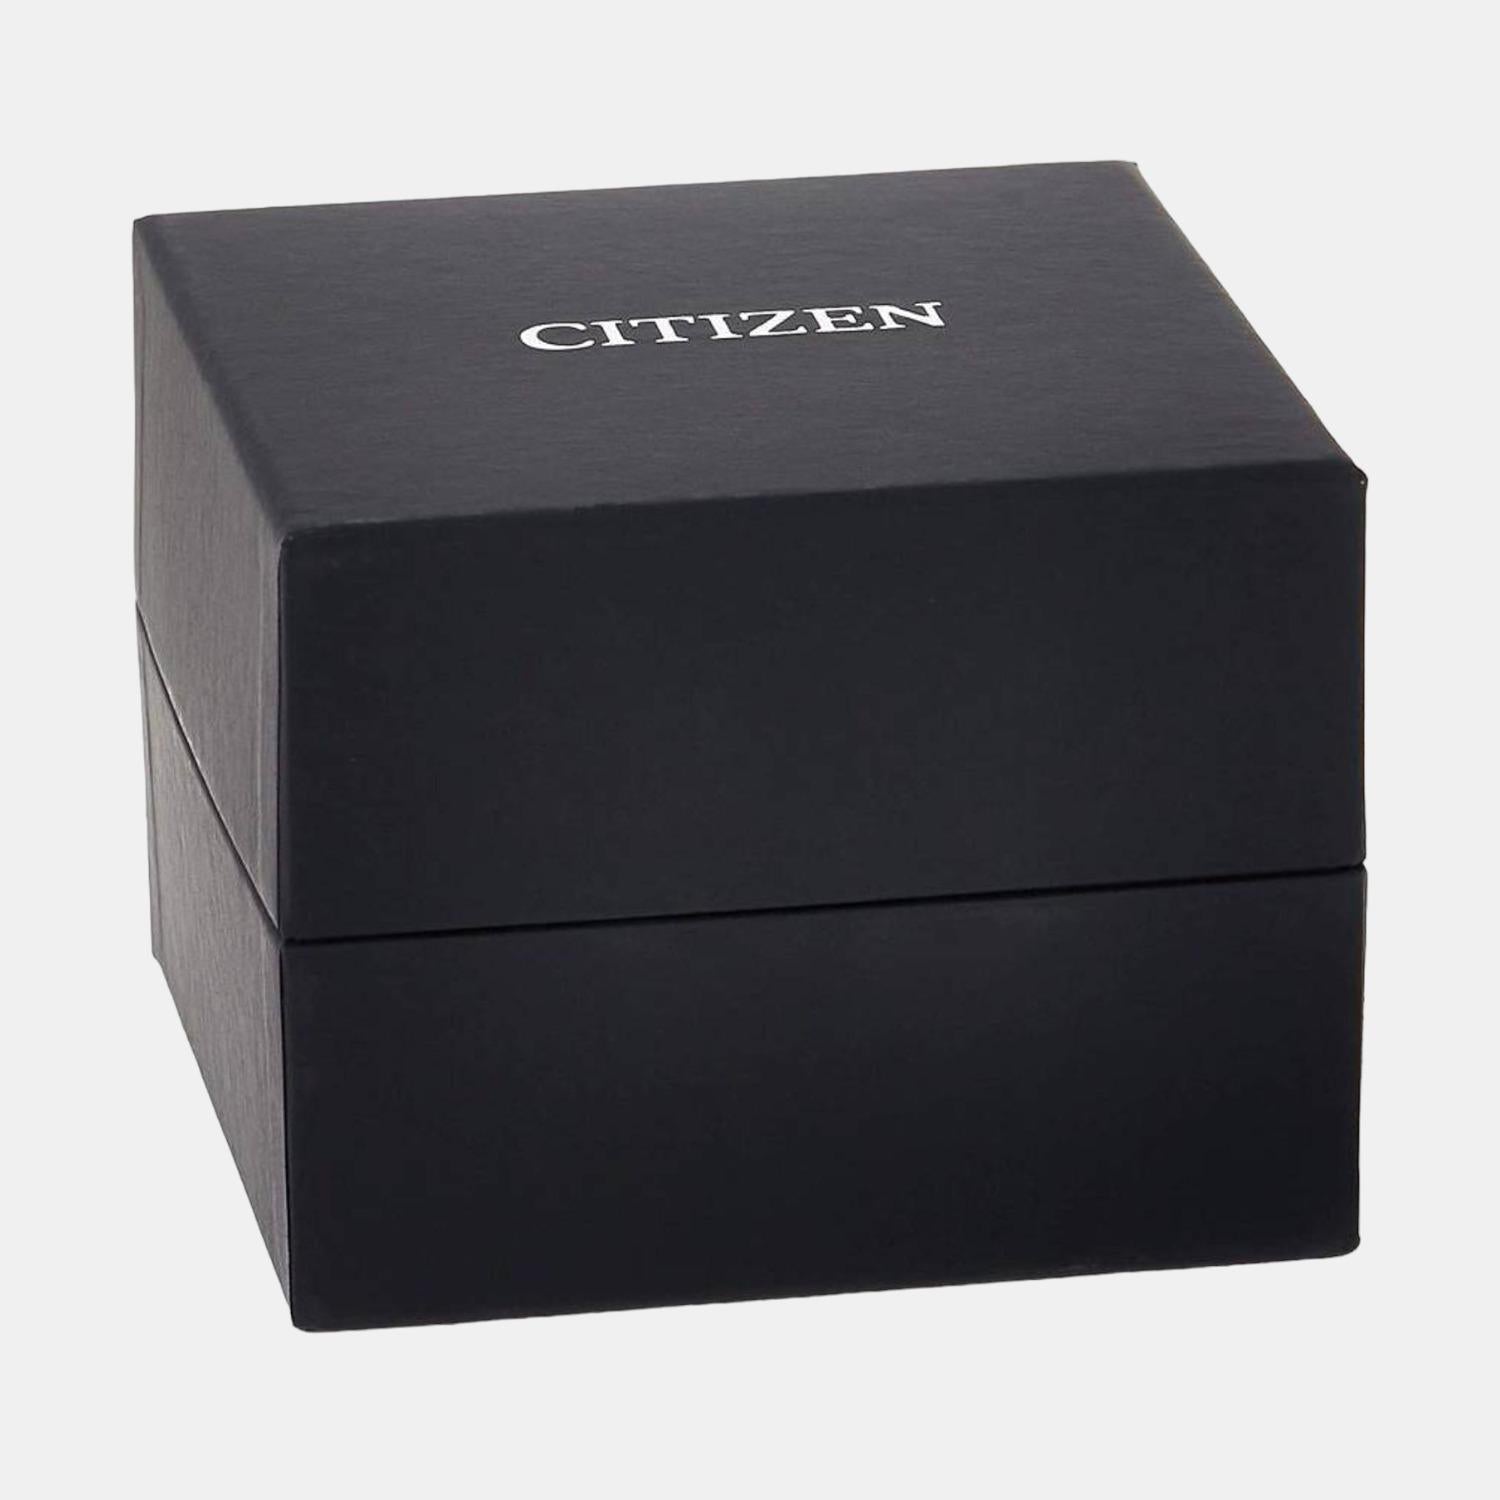 citizen-stainless-steel-black-analog-male-watch-be9180-52e